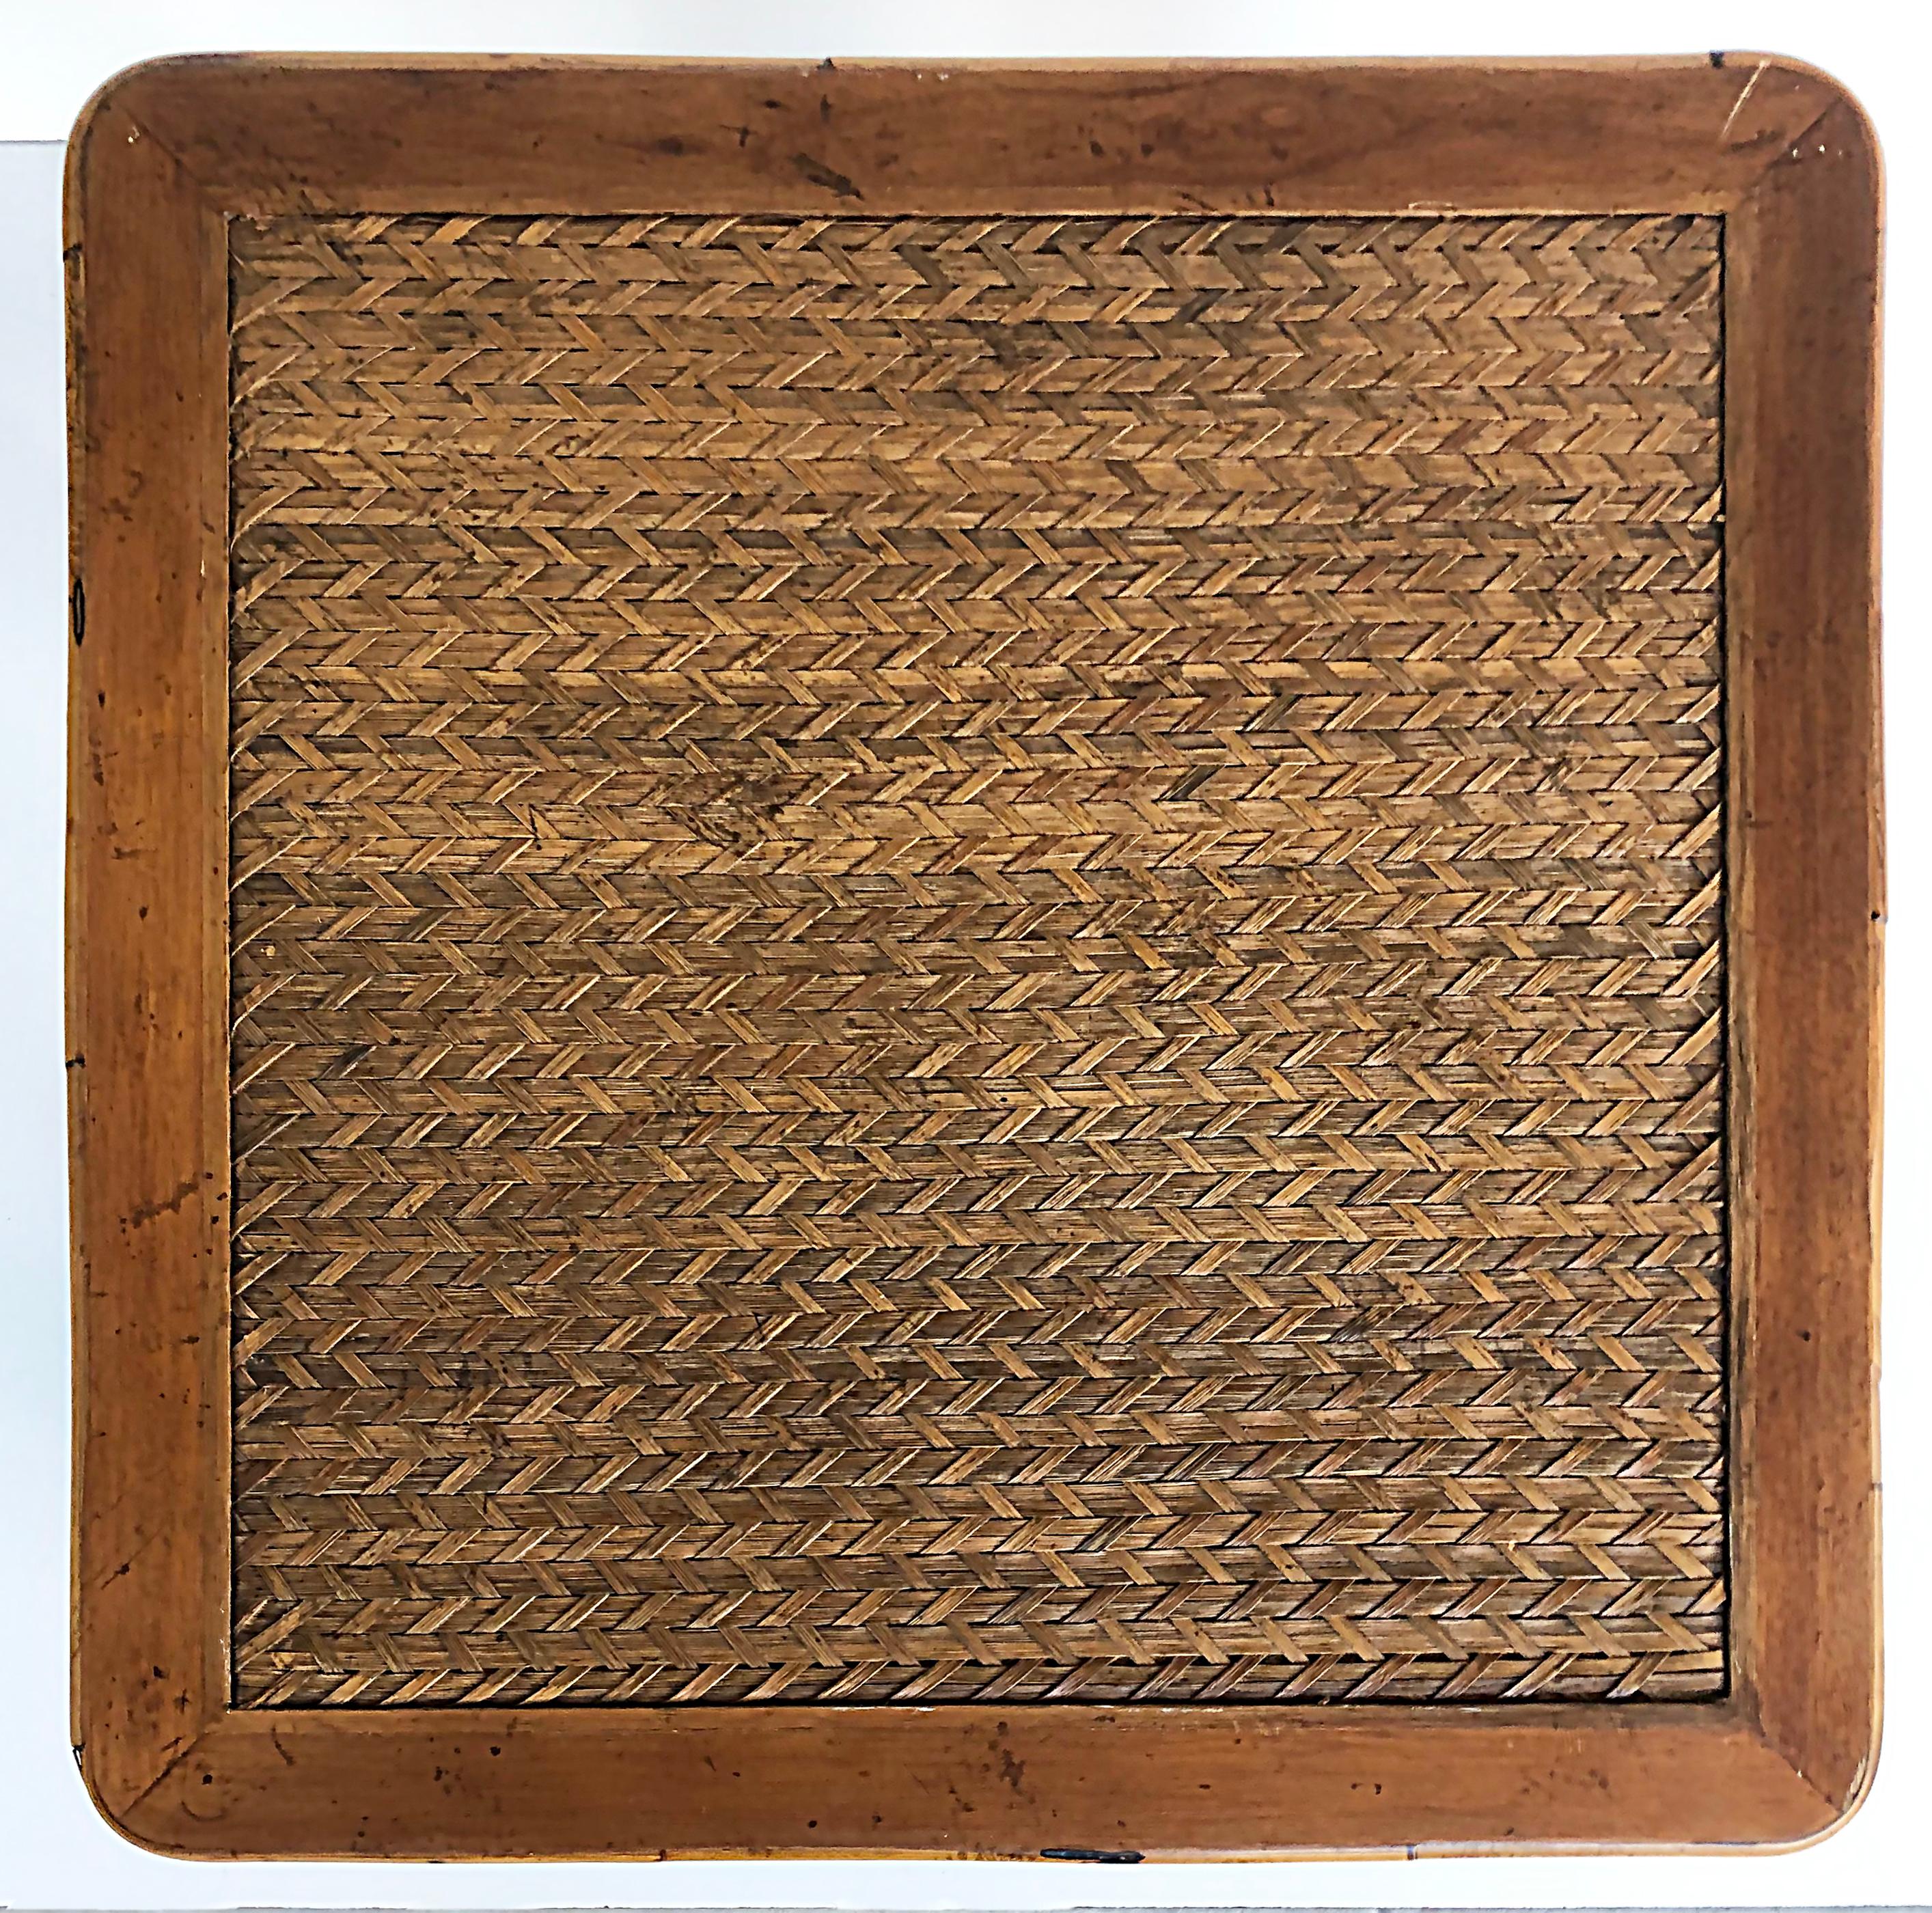 Bamboo, Rattan and Reeded Side Table, Maitland Smith attributed

Offered for sale is a Maitland Smith attributed bamboo table with woven reed table top, rattan bindings and bamboo legs. The table is marked on the underside as 